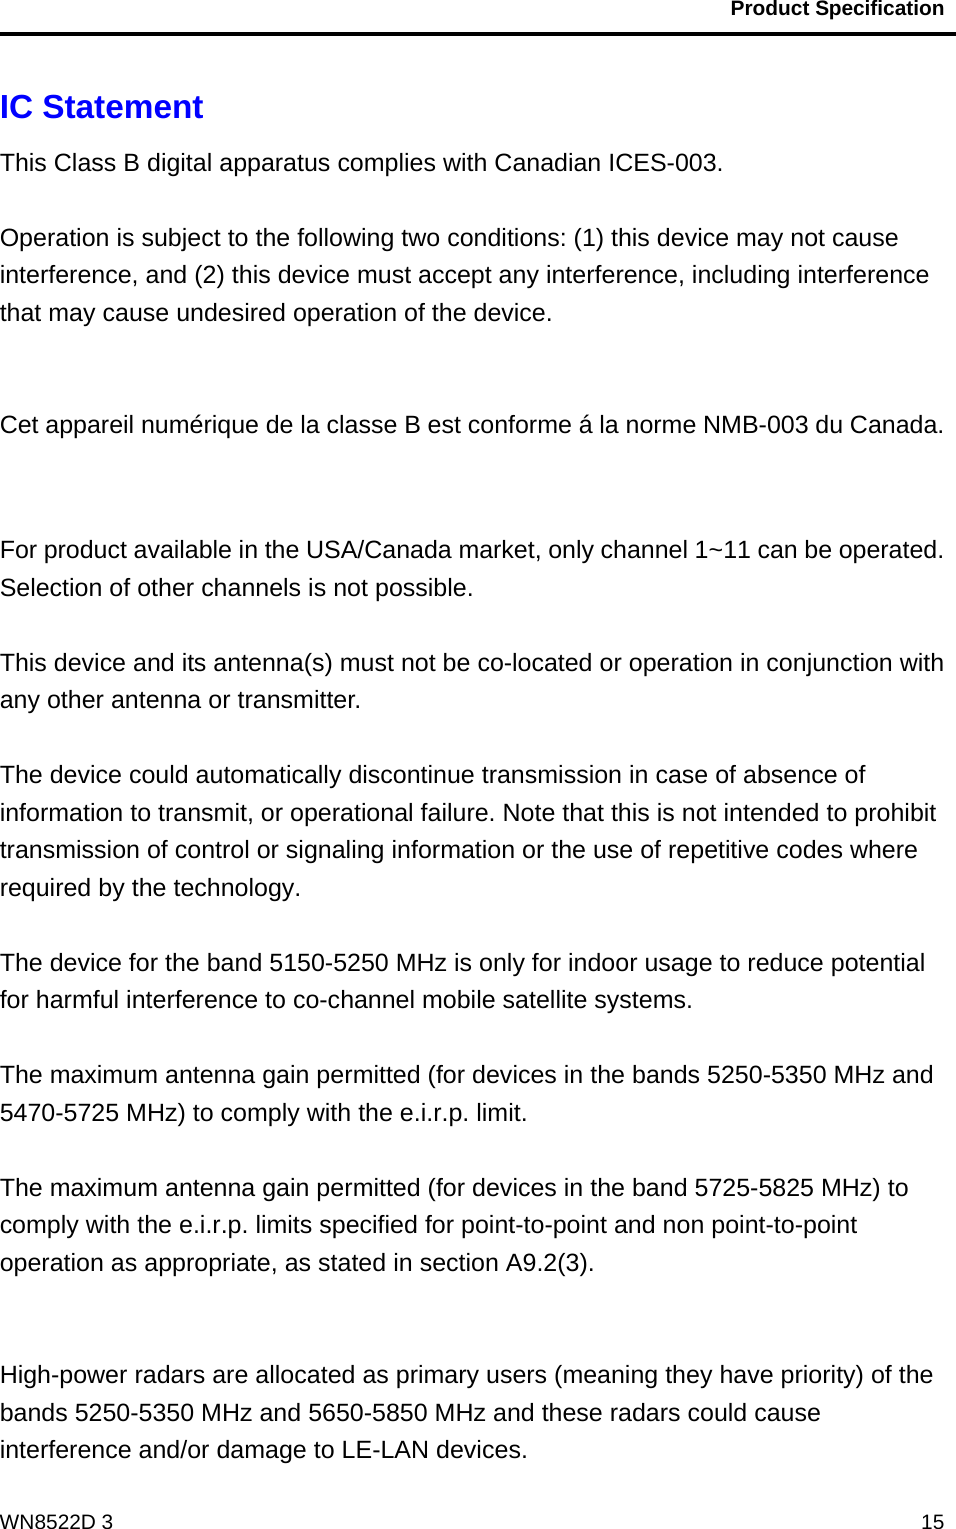                                           Product Specification                                              WN8522D 3  15IC Statement   This Class B digital apparatus complies with Canadian ICES-003.  Operation is subject to the following two conditions: (1) this device may not cause interference, and (2) this device must accept any interference, including interference that may cause undesired operation of the device.   Cet appareil numérique de la classe B est conforme á la norme NMB-003 du Canada.   For product available in the USA/Canada market, only channel 1~11 can be operated. Selection of other channels is not possible.  This device and its antenna(s) must not be co-located or operation in conjunction with any other antenna or transmitter.  The device could automatically discontinue transmission in case of absence of information to transmit, or operational failure. Note that this is not intended to prohibit transmission of control or signaling information or the use of repetitive codes where required by the technology.  The device for the band 5150-5250 MHz is only for indoor usage to reduce potential for harmful interference to co-channel mobile satellite systems.  The maximum antenna gain permitted (for devices in the bands 5250-5350 MHz and 5470-5725 MHz) to comply with the e.i.r.p. limit.  The maximum antenna gain permitted (for devices in the band 5725-5825 MHz) to comply with the e.i.r.p. limits specified for point-to-point and non point-to-point operation as appropriate, as stated in section A9.2(3).   High-power radars are allocated as primary users (meaning they have priority) of the bands 5250-5350 MHz and 5650-5850 MHz and these radars could cause interference and/or damage to LE-LAN devices. 